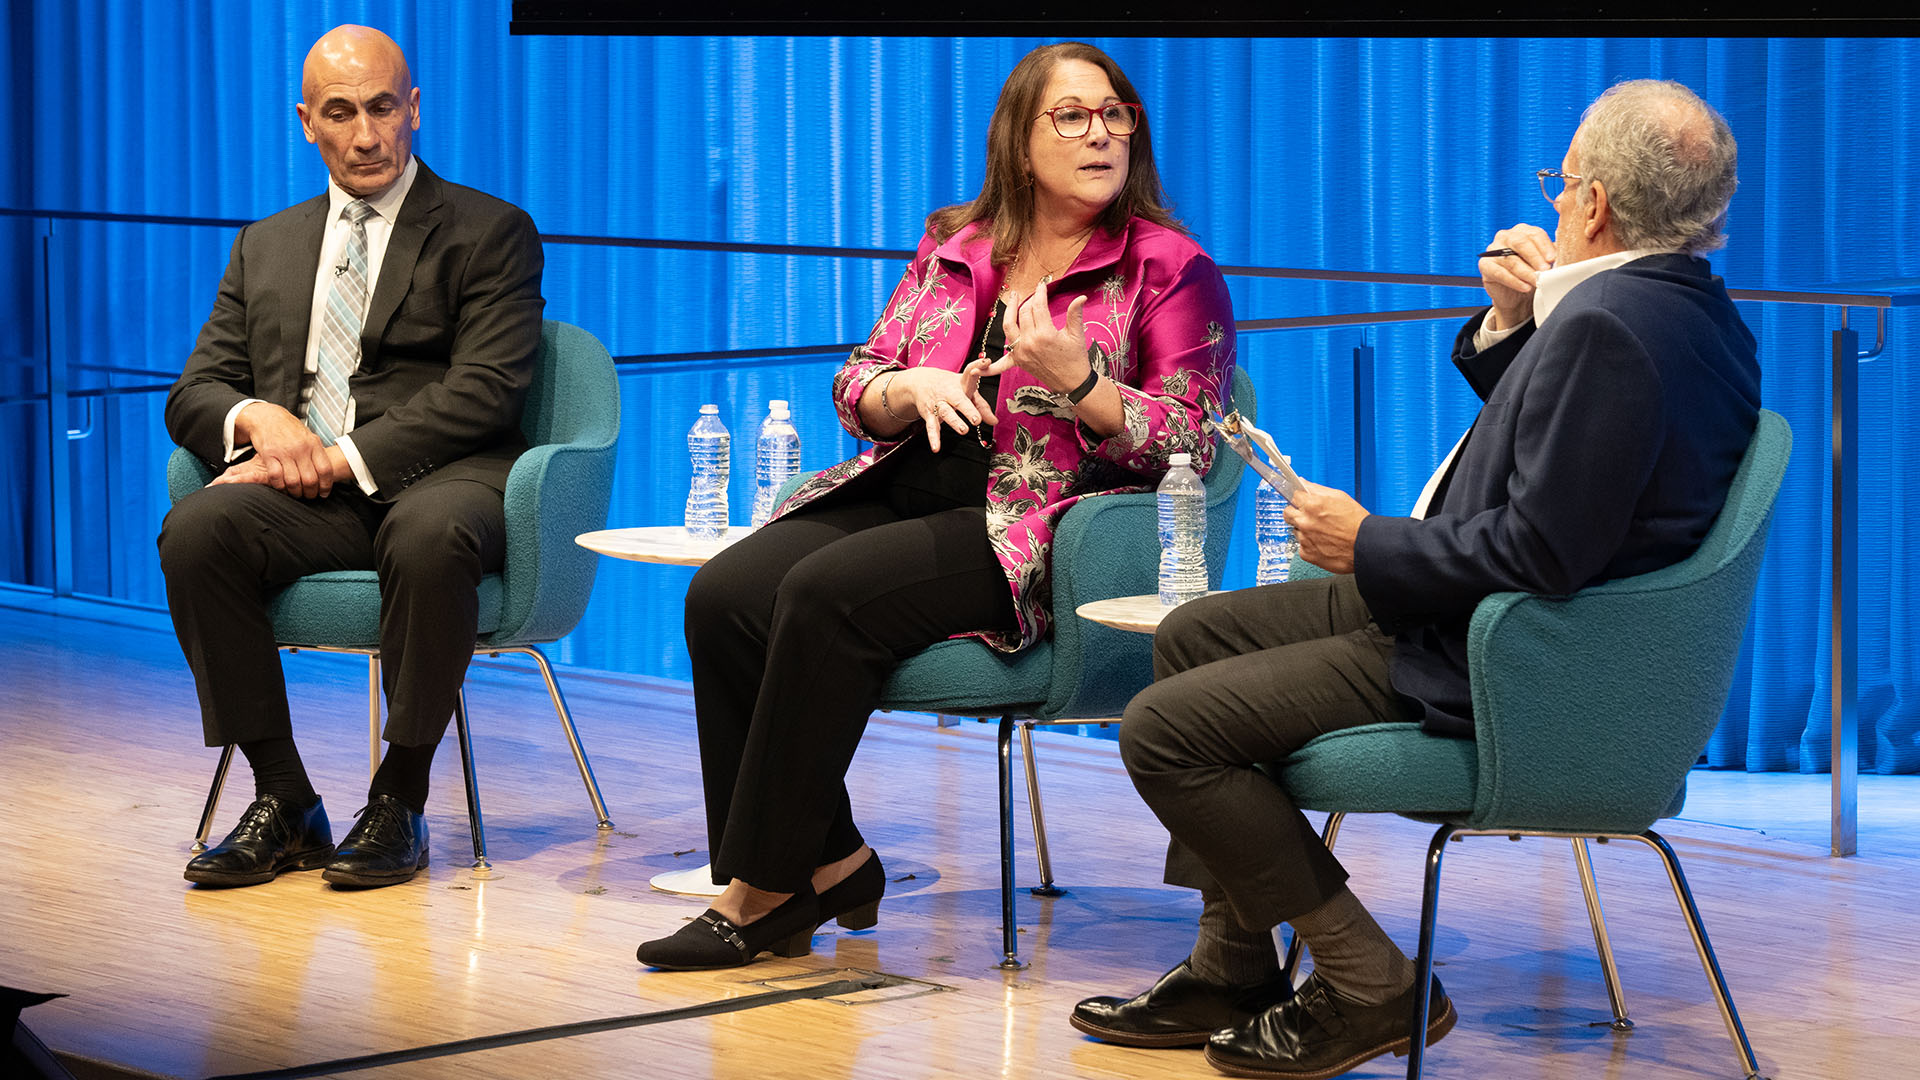 From left: John Liguori, Mary E. Galligan (talking) and Clifford Chanin on stage